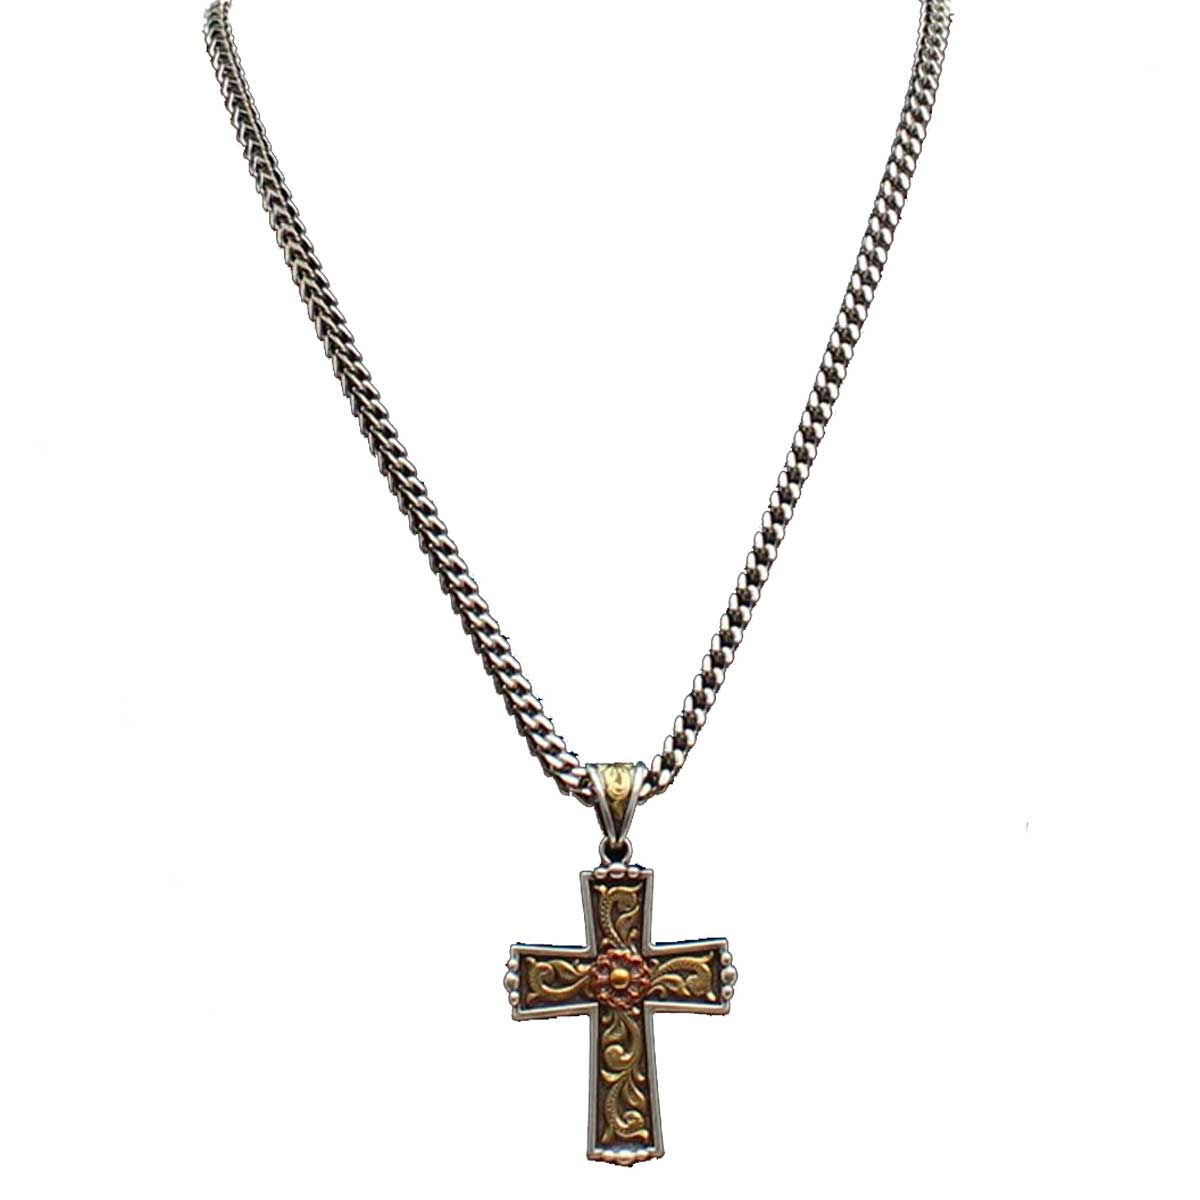 M & F Western Twister Antique Cross Necklace – Lazy J Ranch Wear Stores